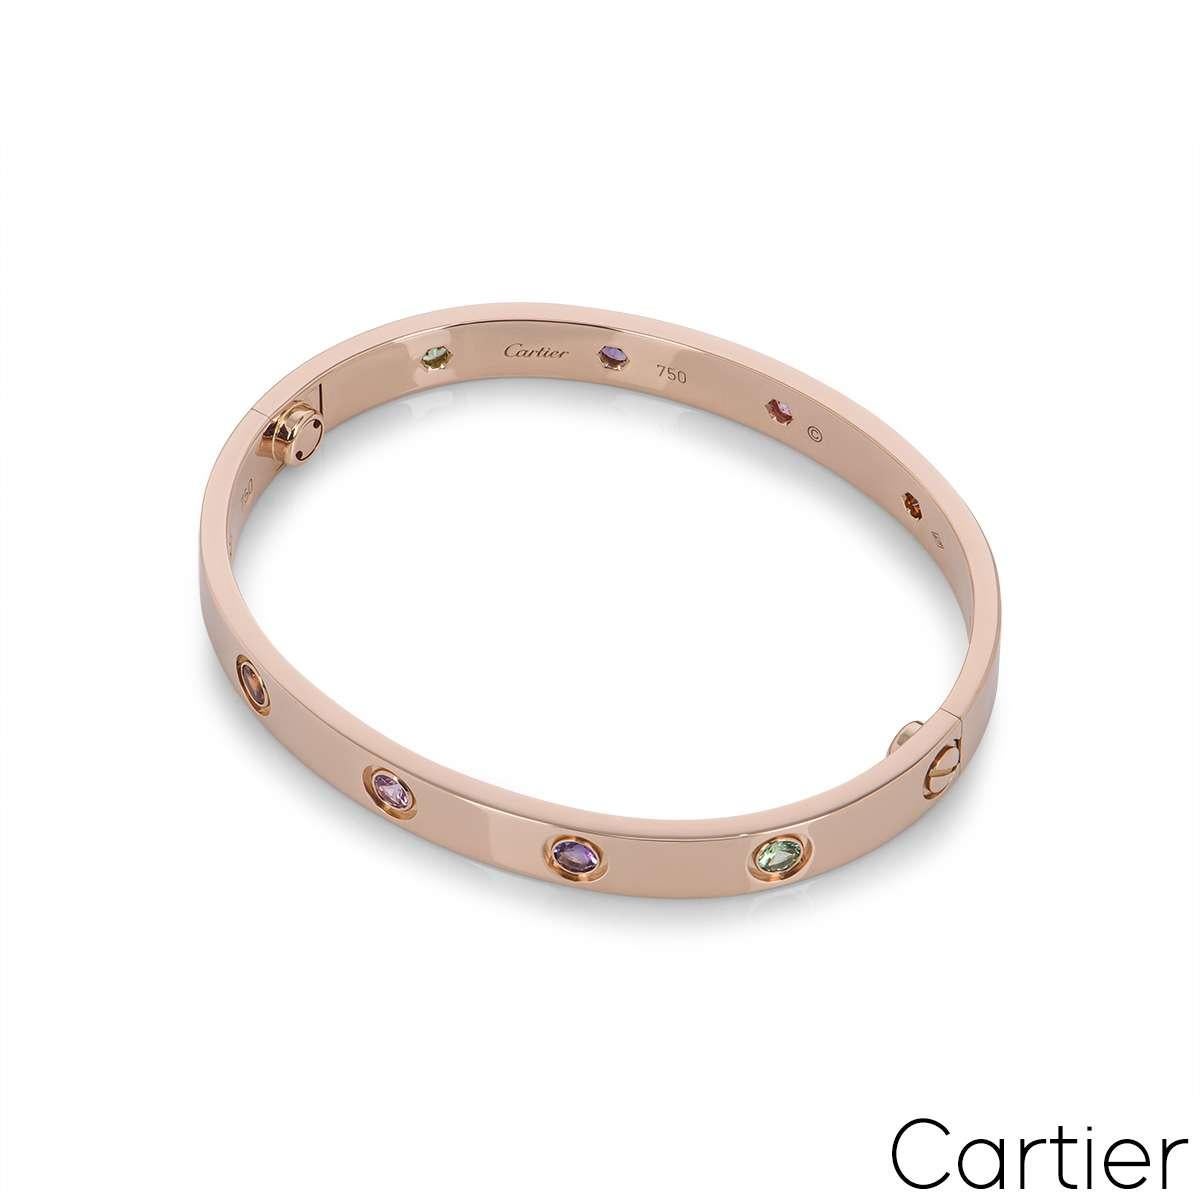 Cartier Rose Gold Coloured Stones Love Bracelet Size 17 B6036517 In Excellent Condition For Sale In London, GB